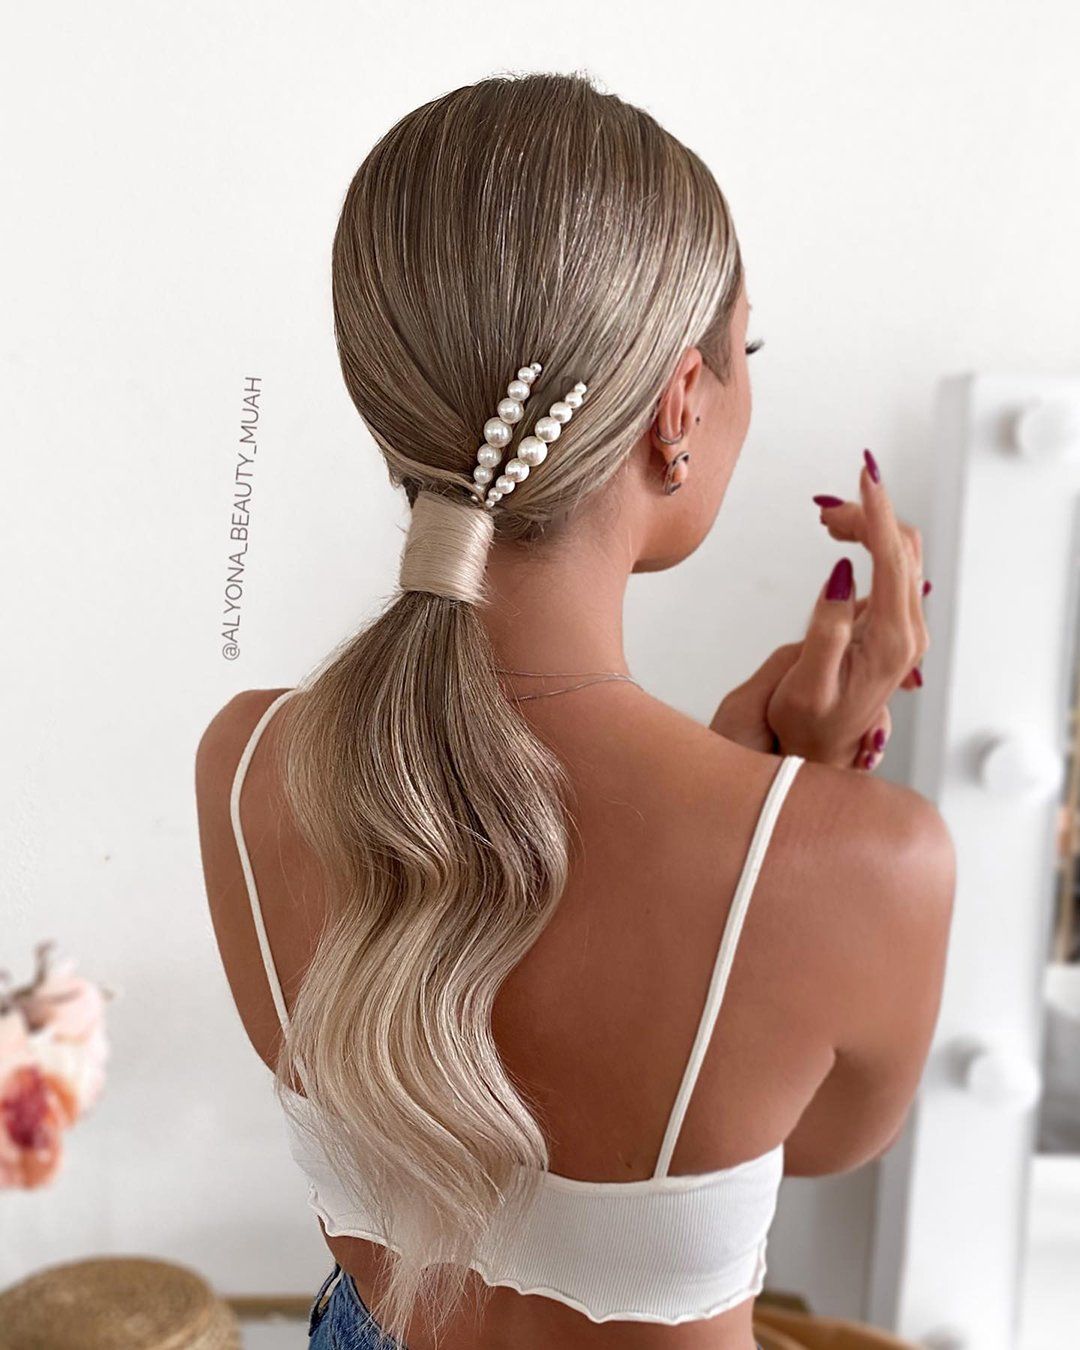 Low Ponytail Hairstyles For Weddings